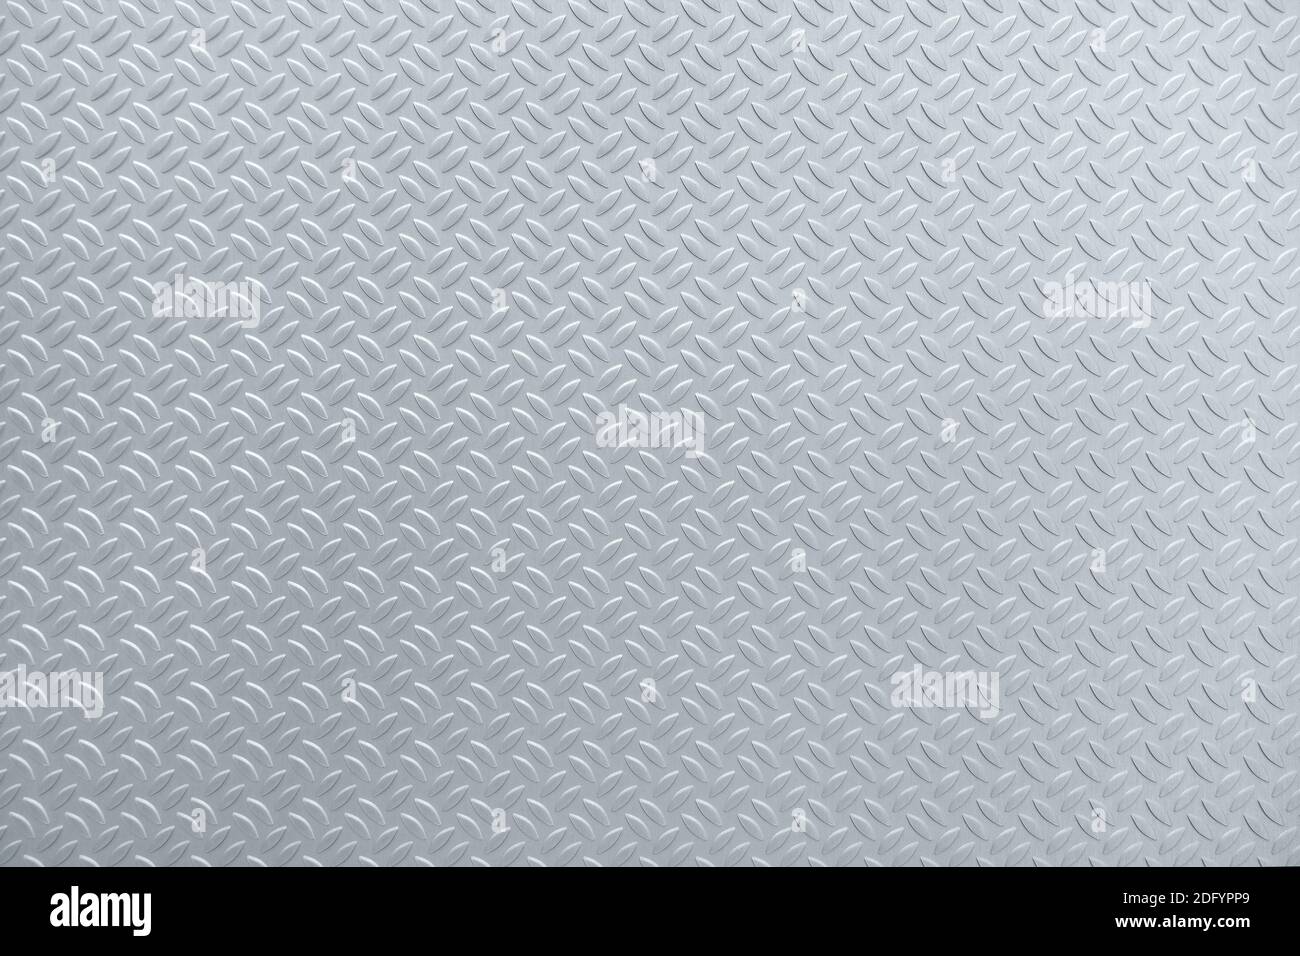 Industrial, silver-colored checker plate with abstract pattern Stock Photo